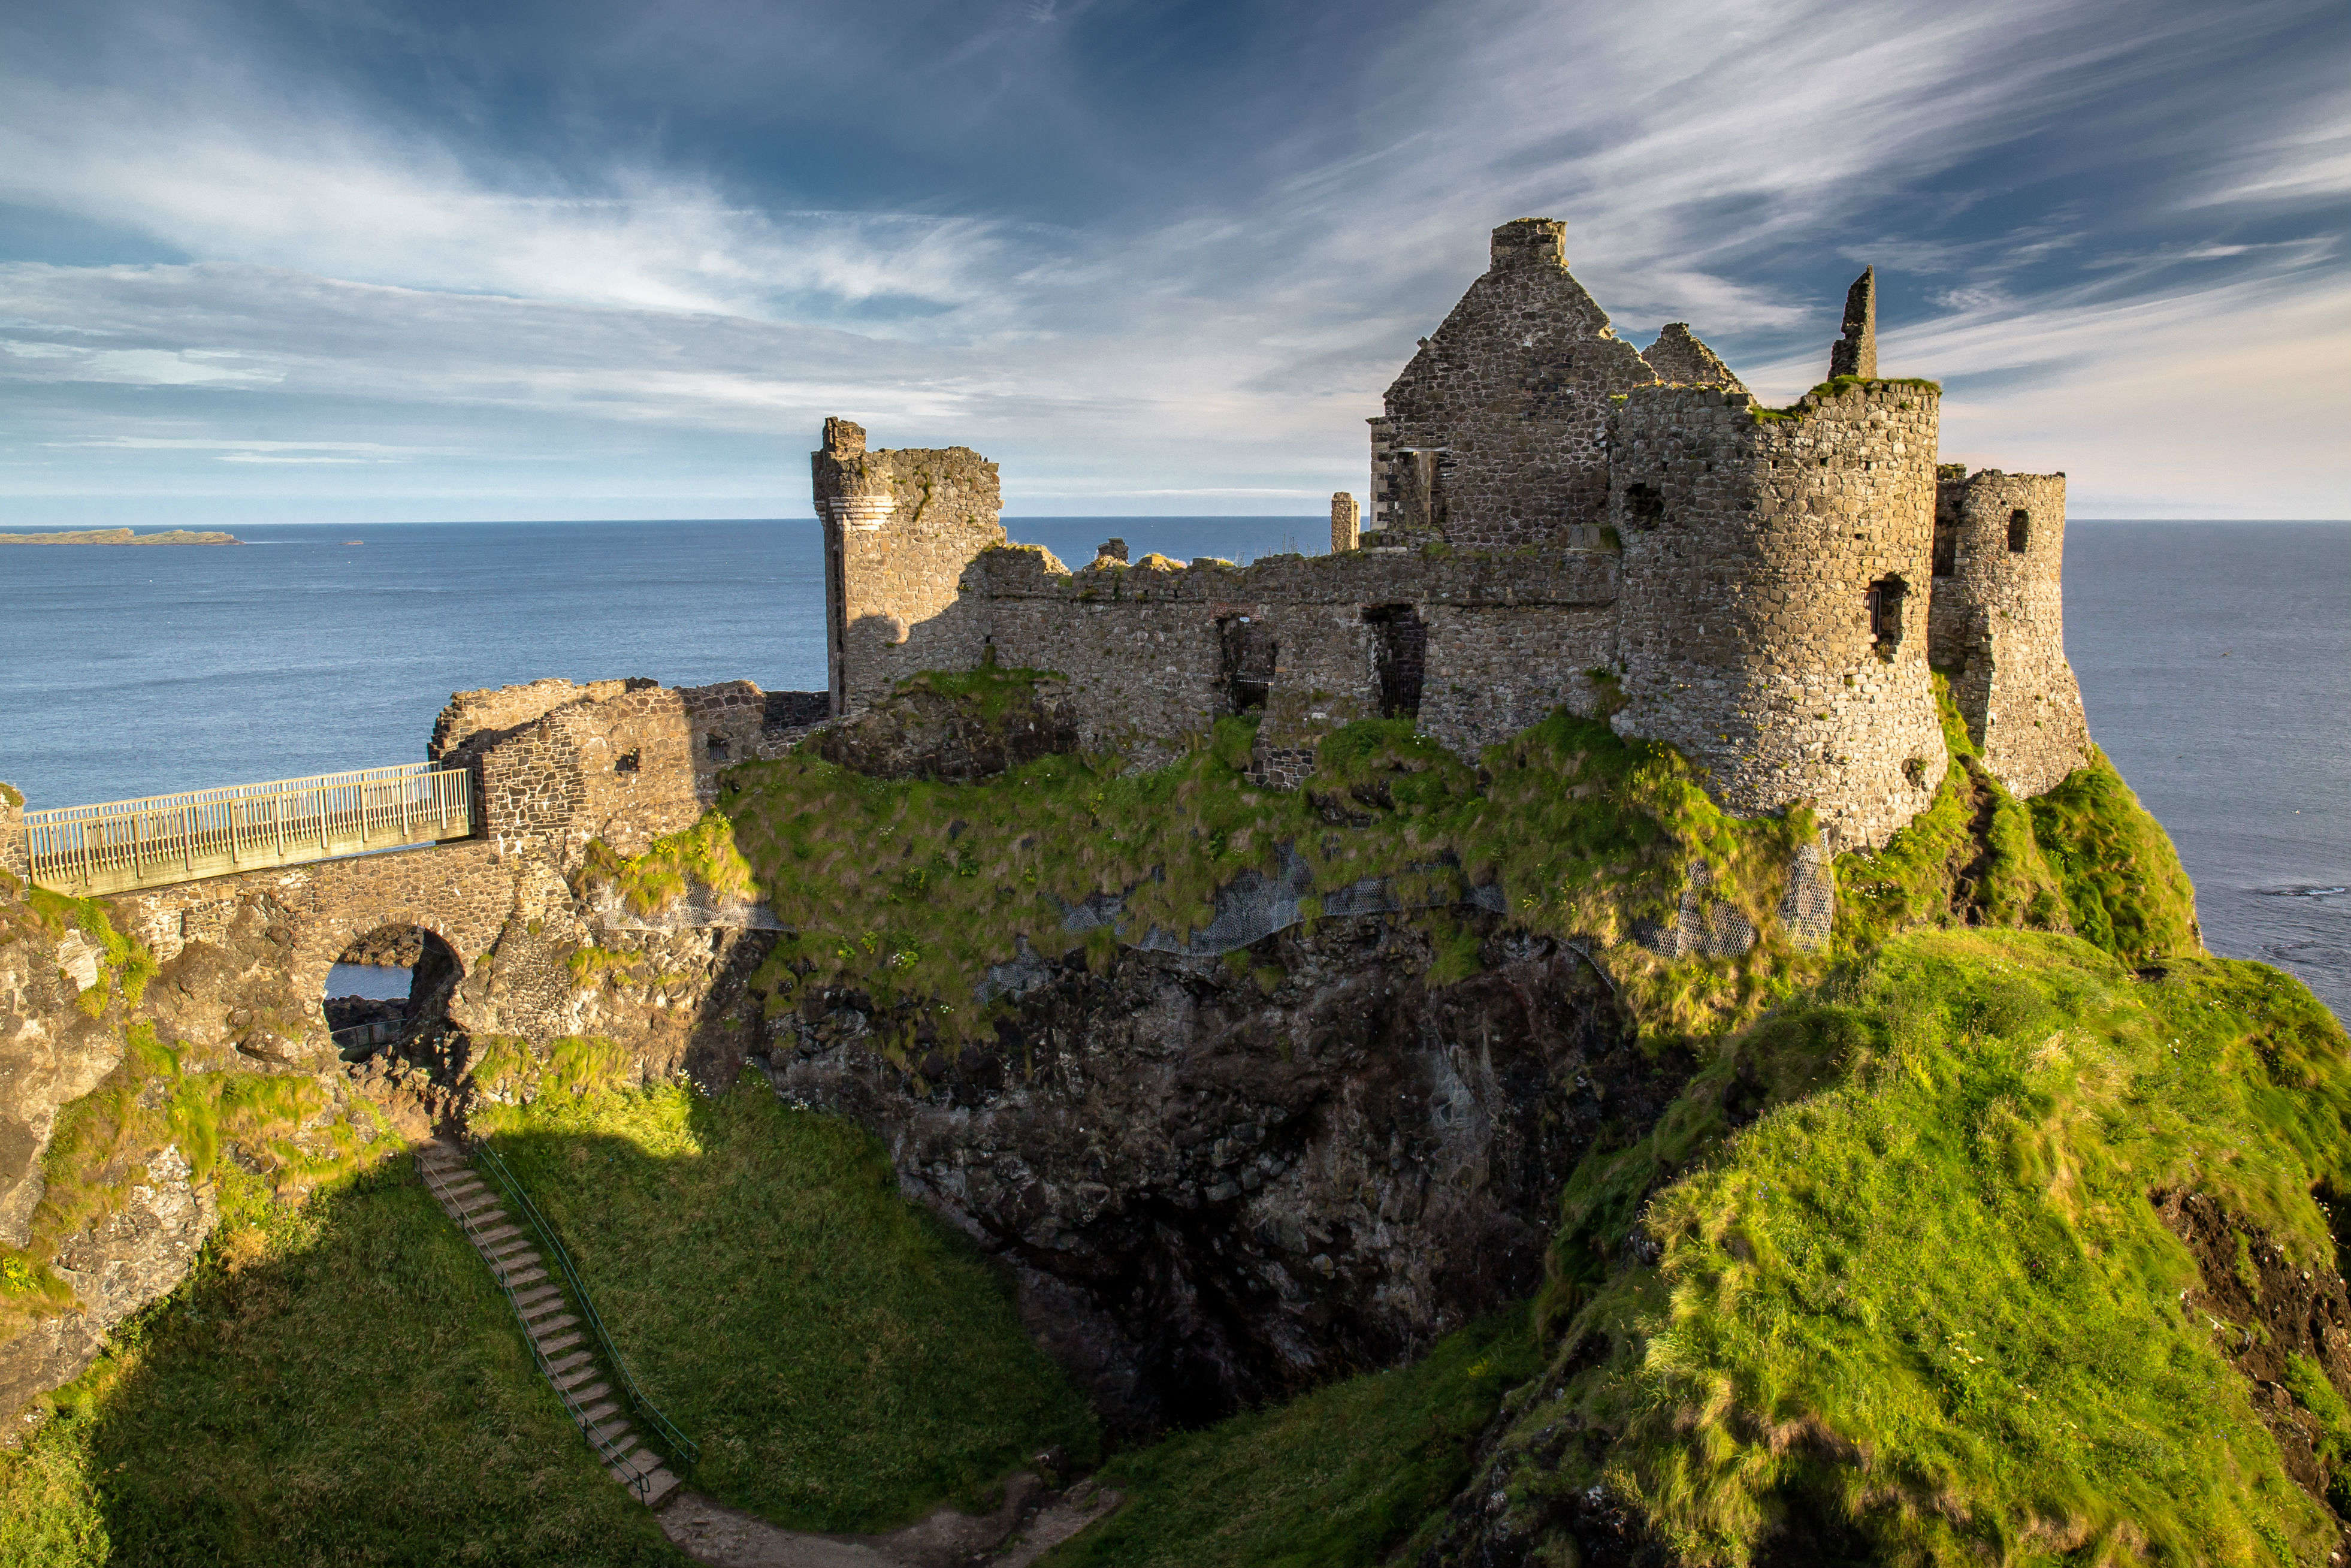 Game of Thrones’ parting gift to fans – studio tour in Northern Ireland